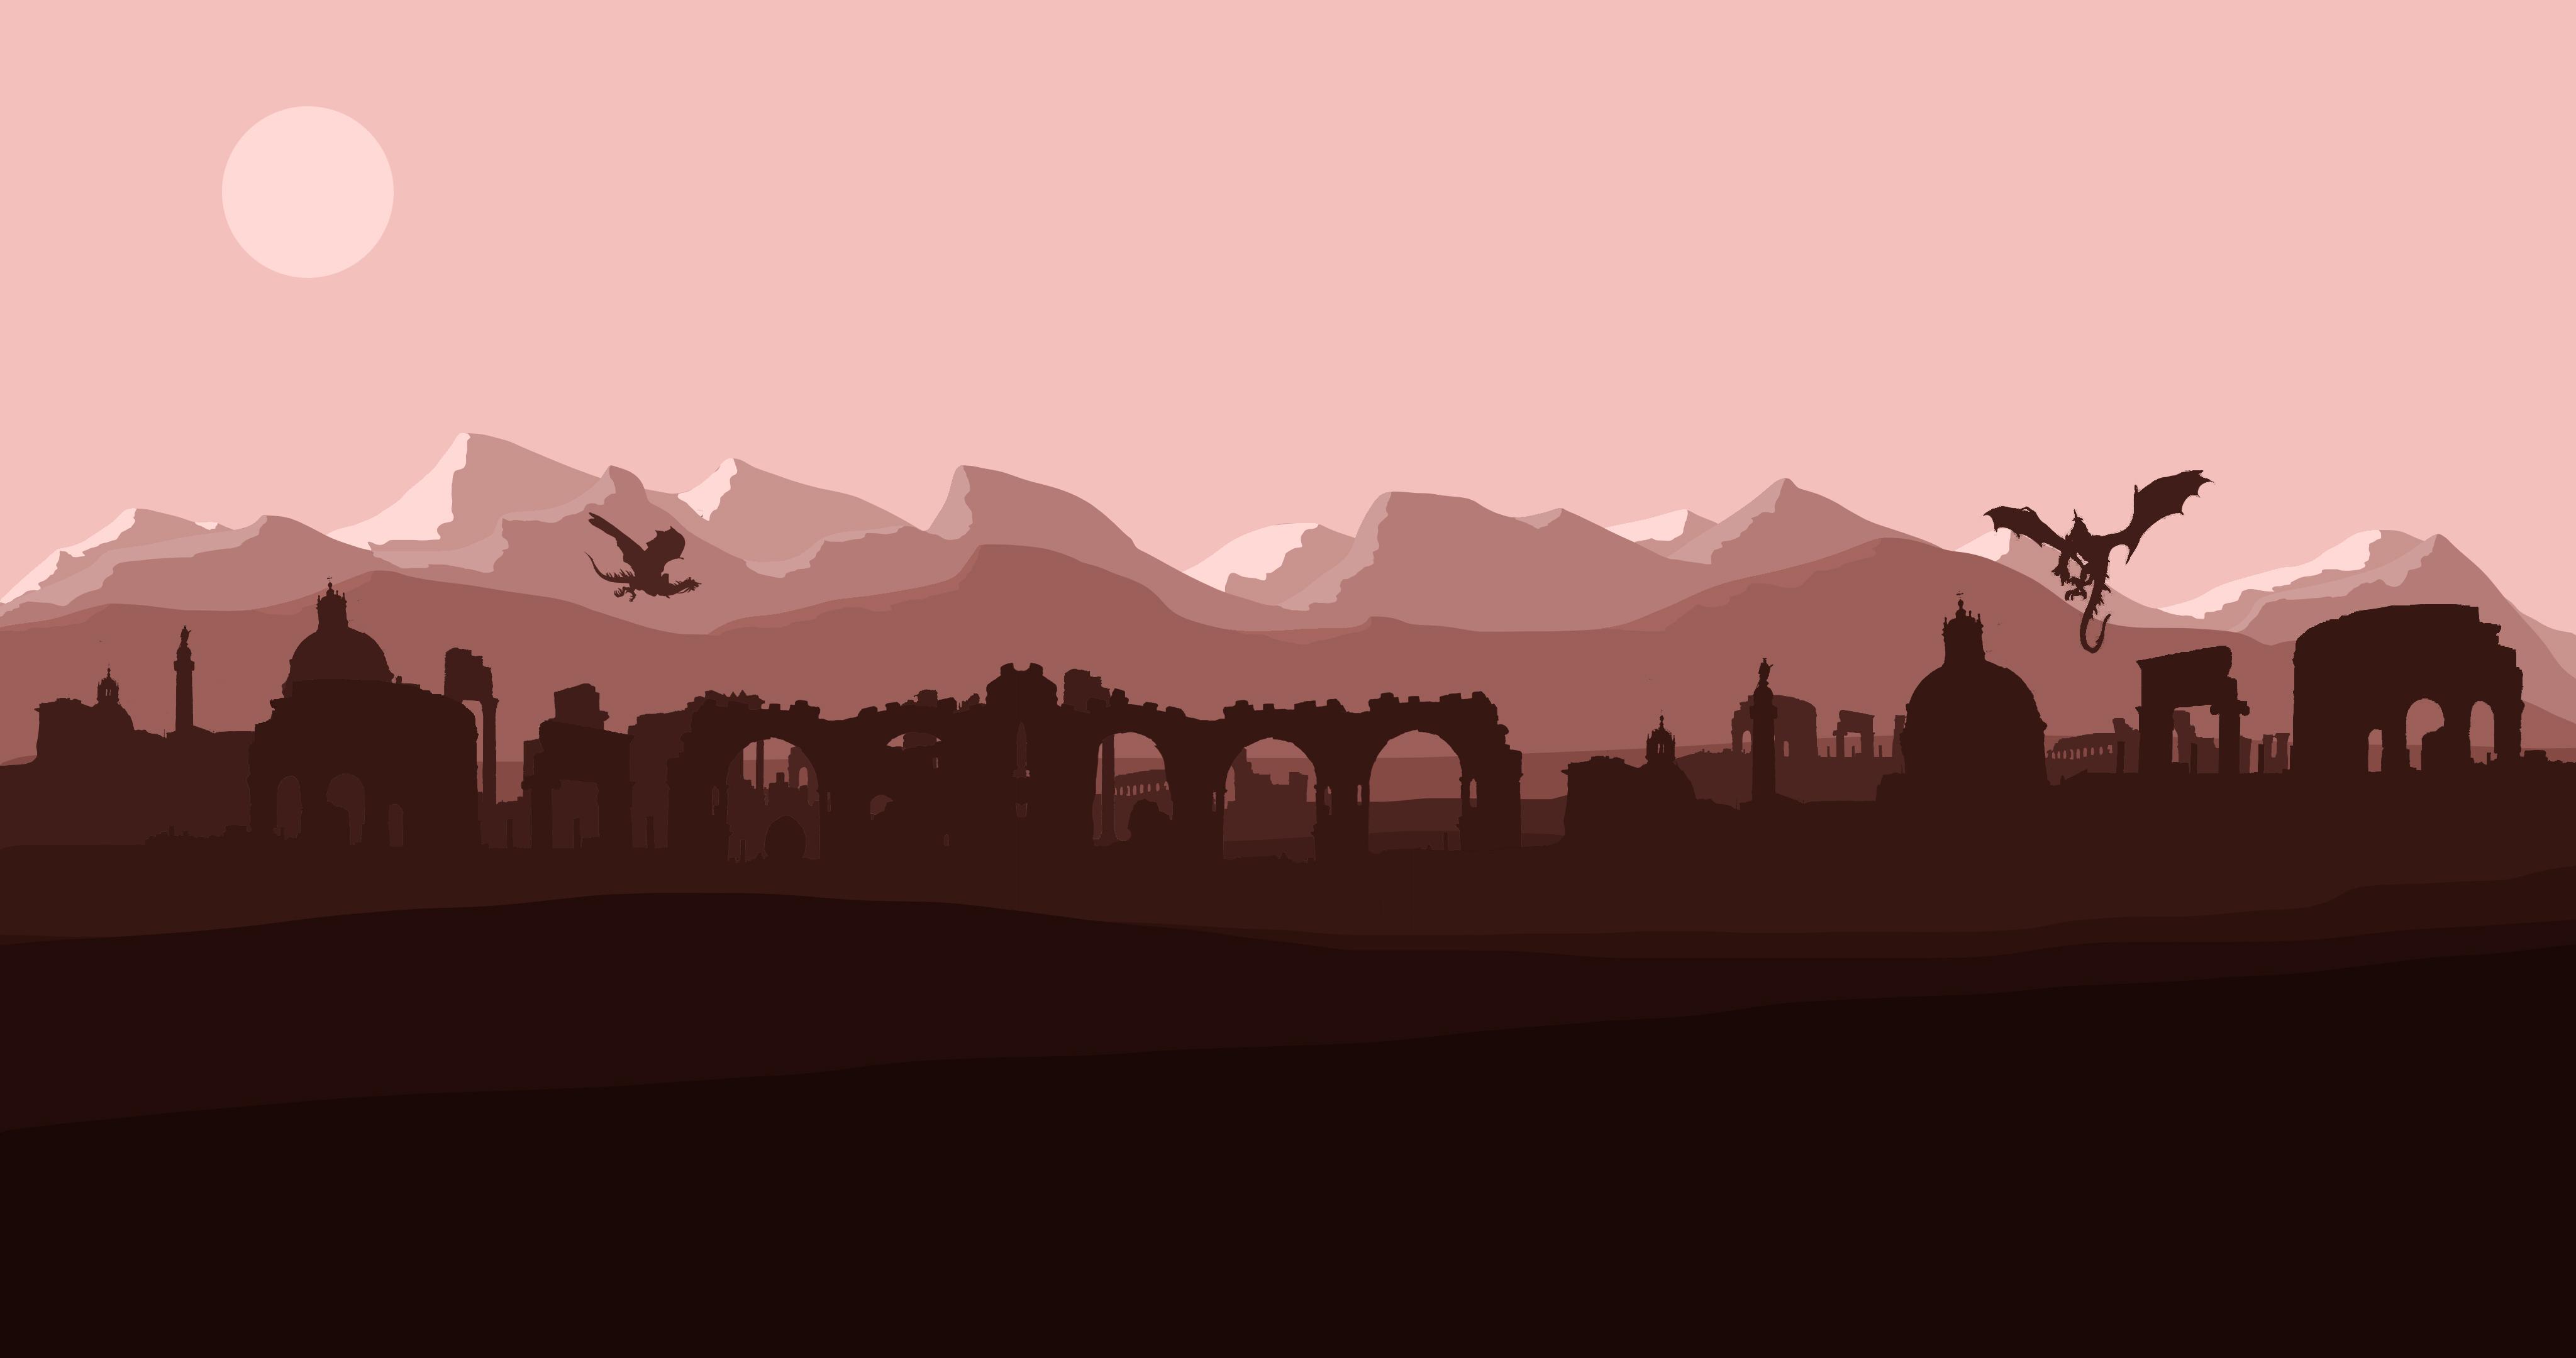 Lord of the Rings Minimalist Wallpaper Free Lord of the Rings Minimalist Background